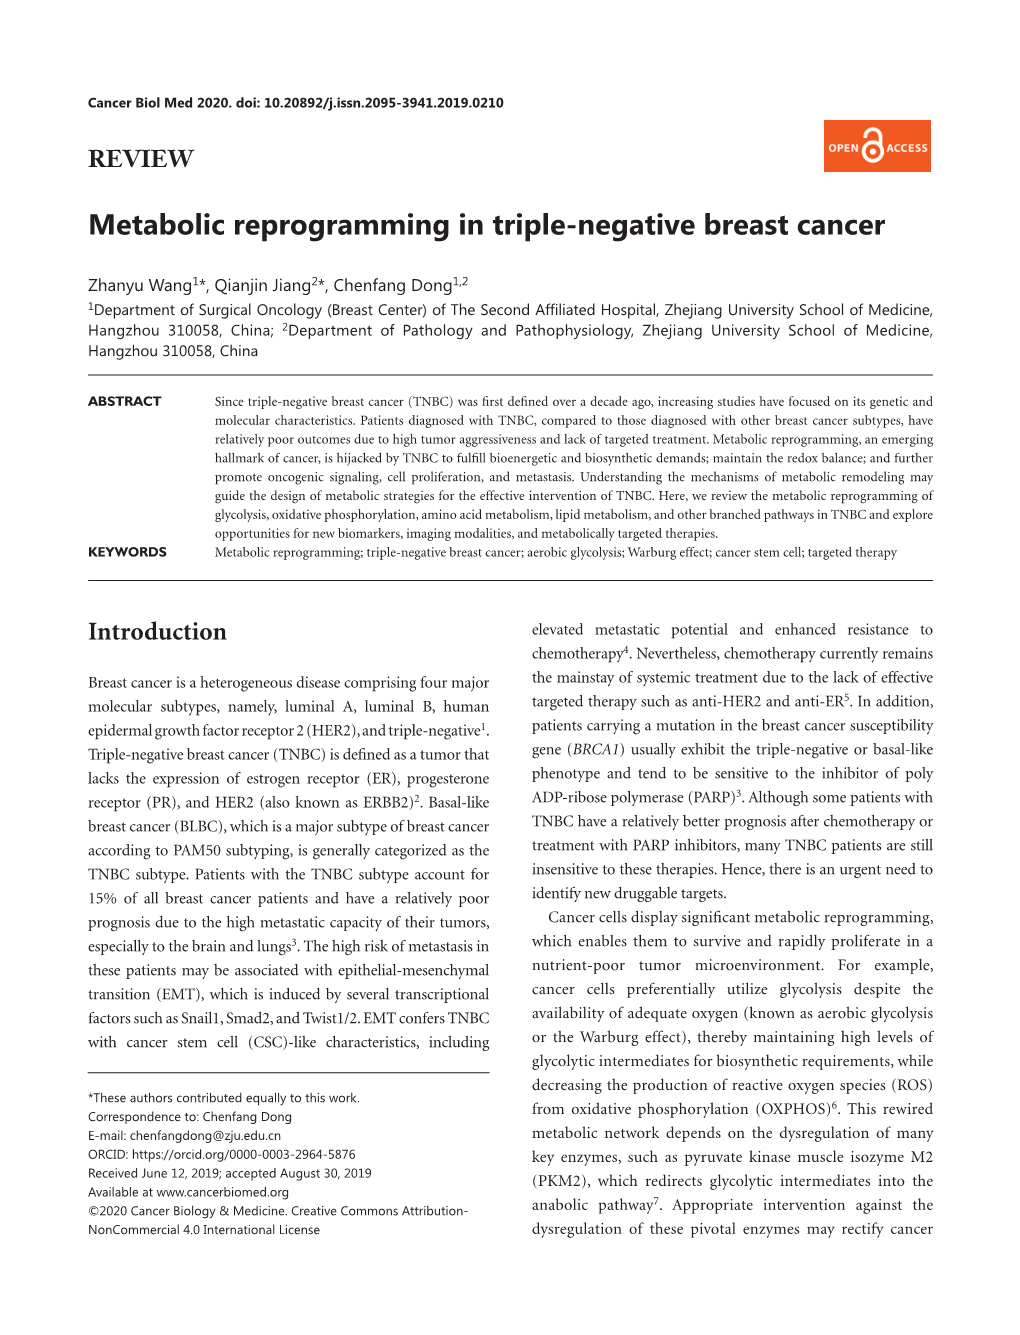 Metabolic Reprogramming in Triple-Negative Breast Cancer